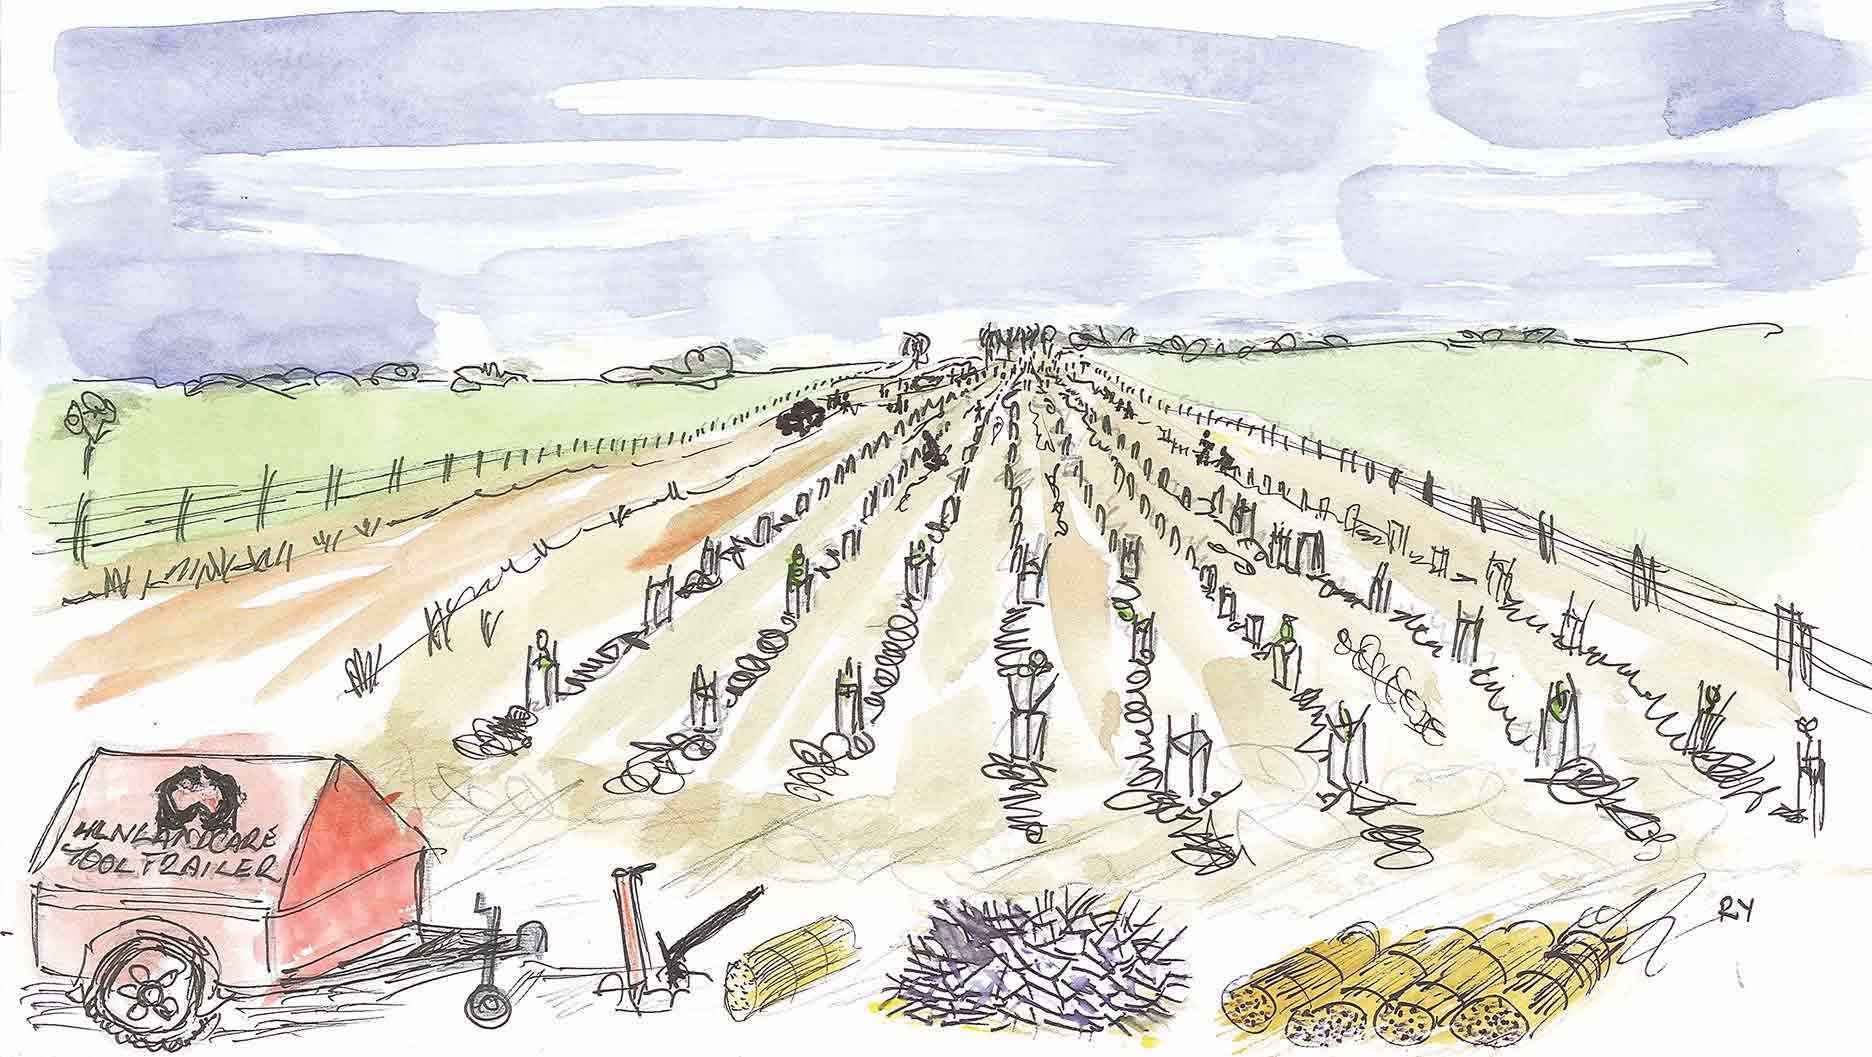 A Project Hindmarsh planting day at Nhill in 2012. Illustration by Rob Youl.